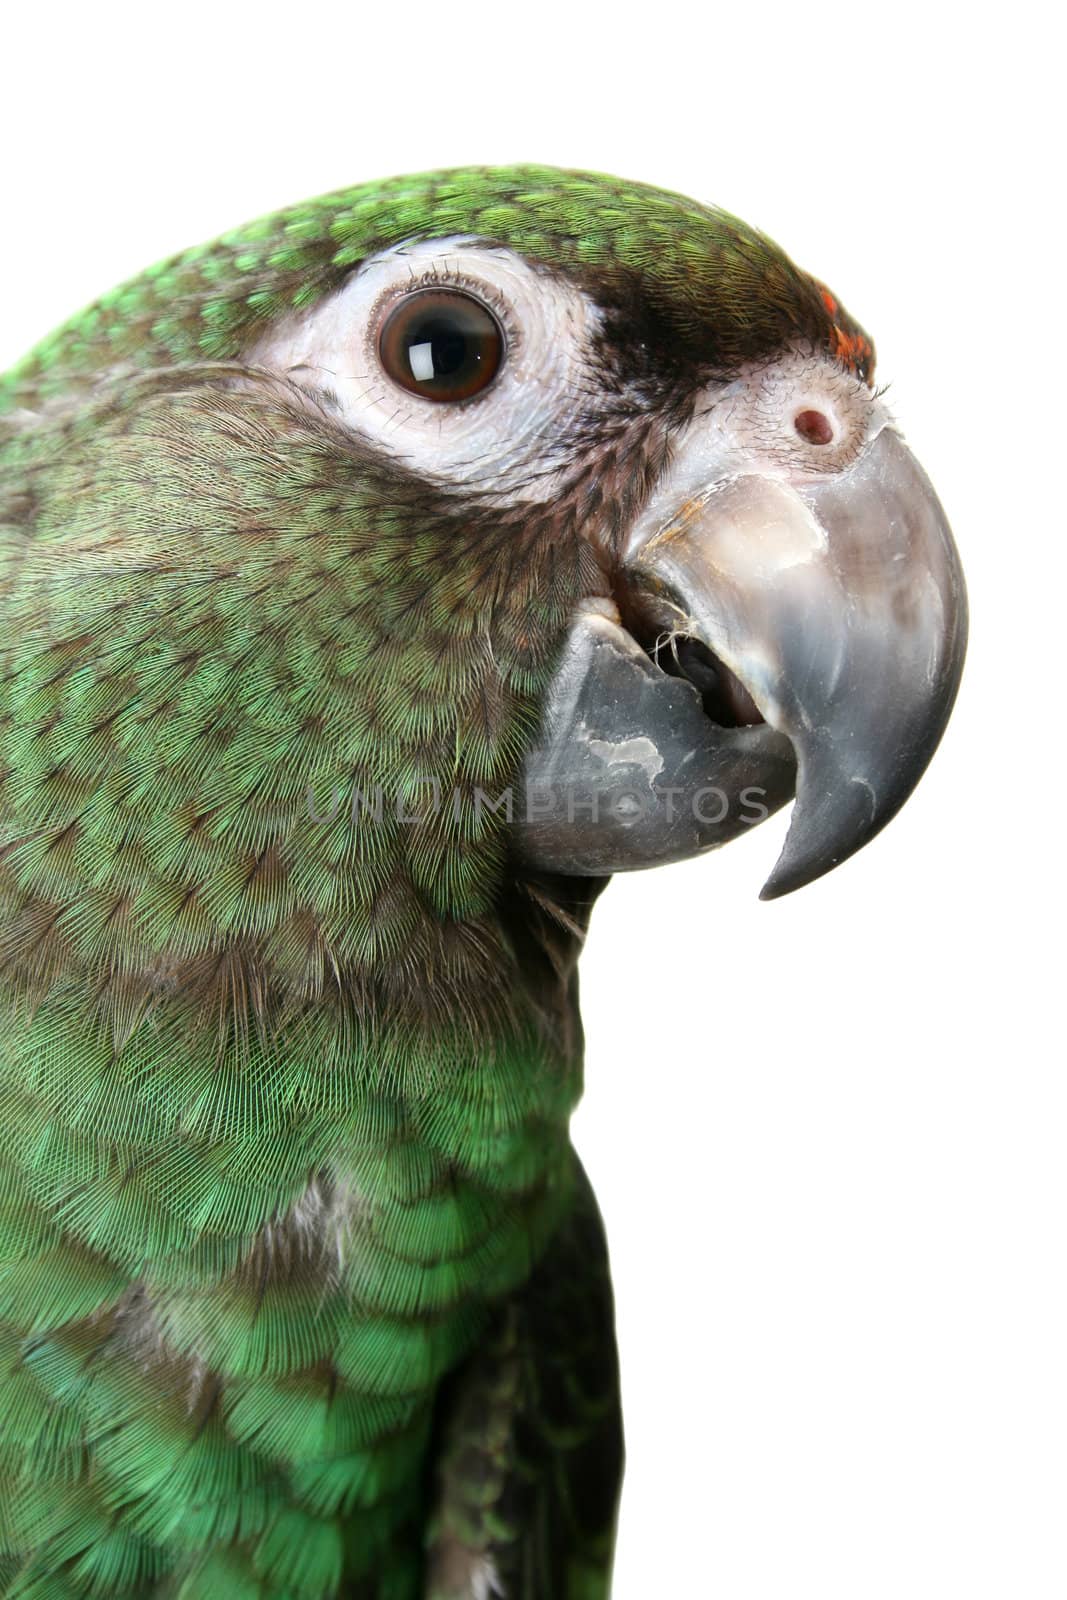 6 month old Jardine parrot on a white background